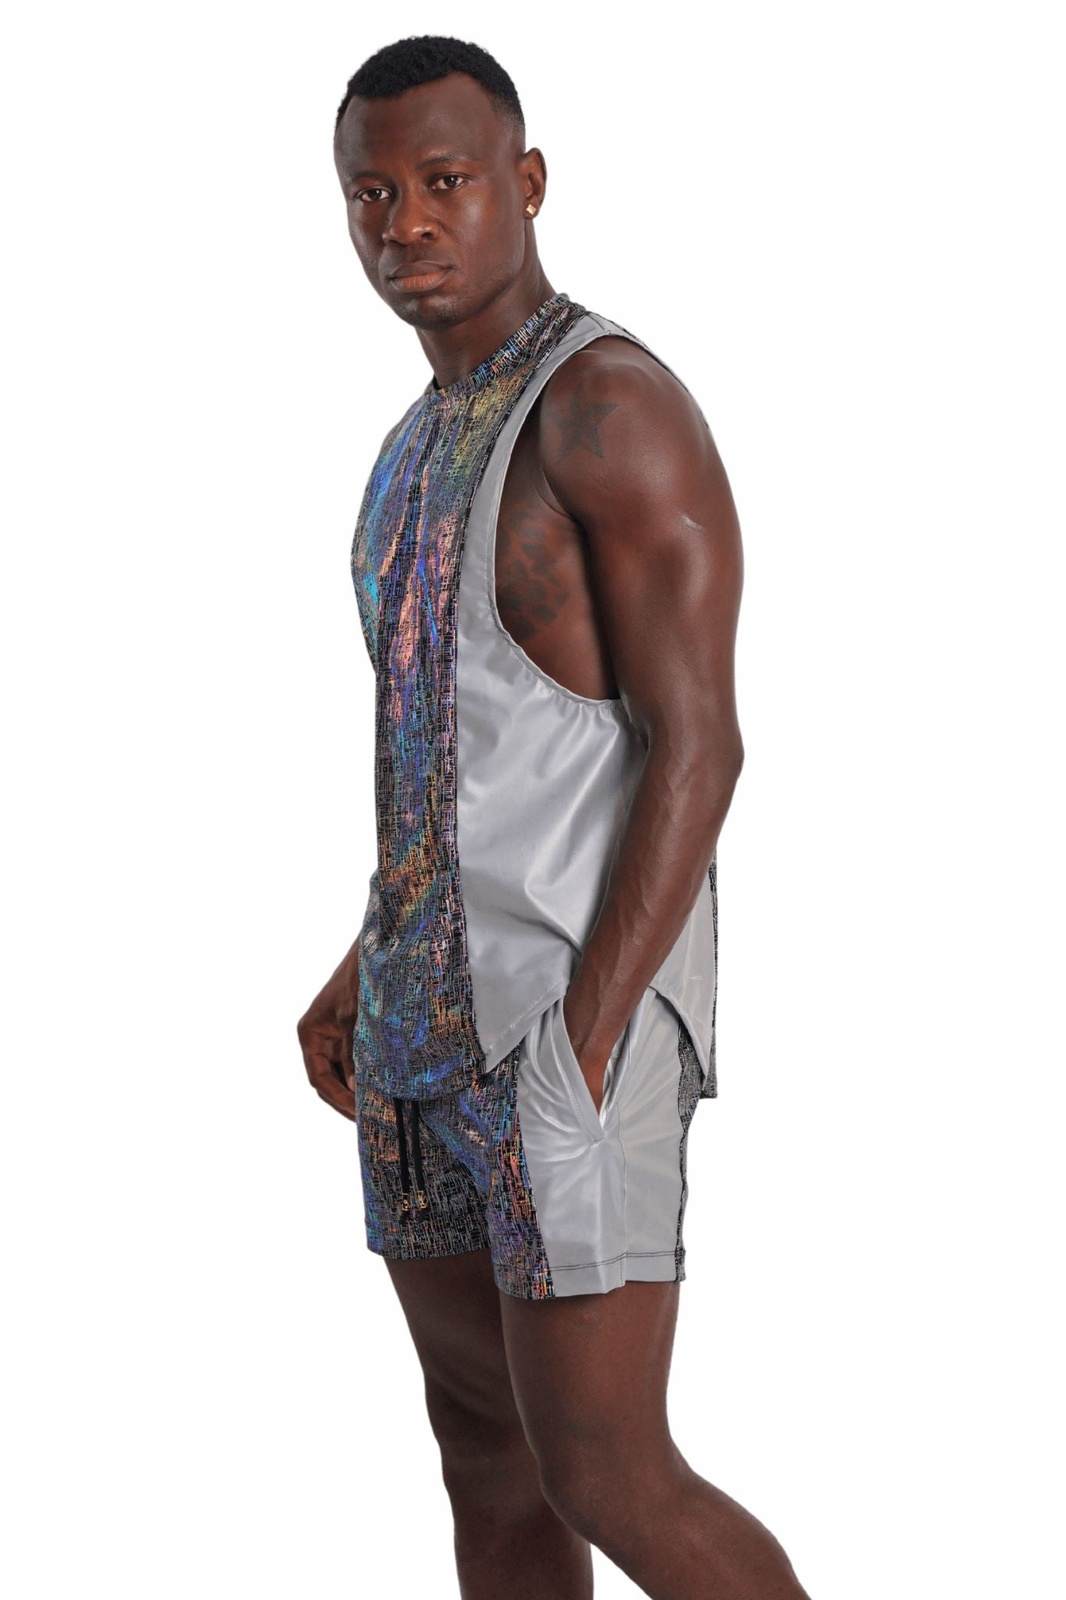 The Hot Shot Tank Top in holographic silver matrix fabric from Love Khaos